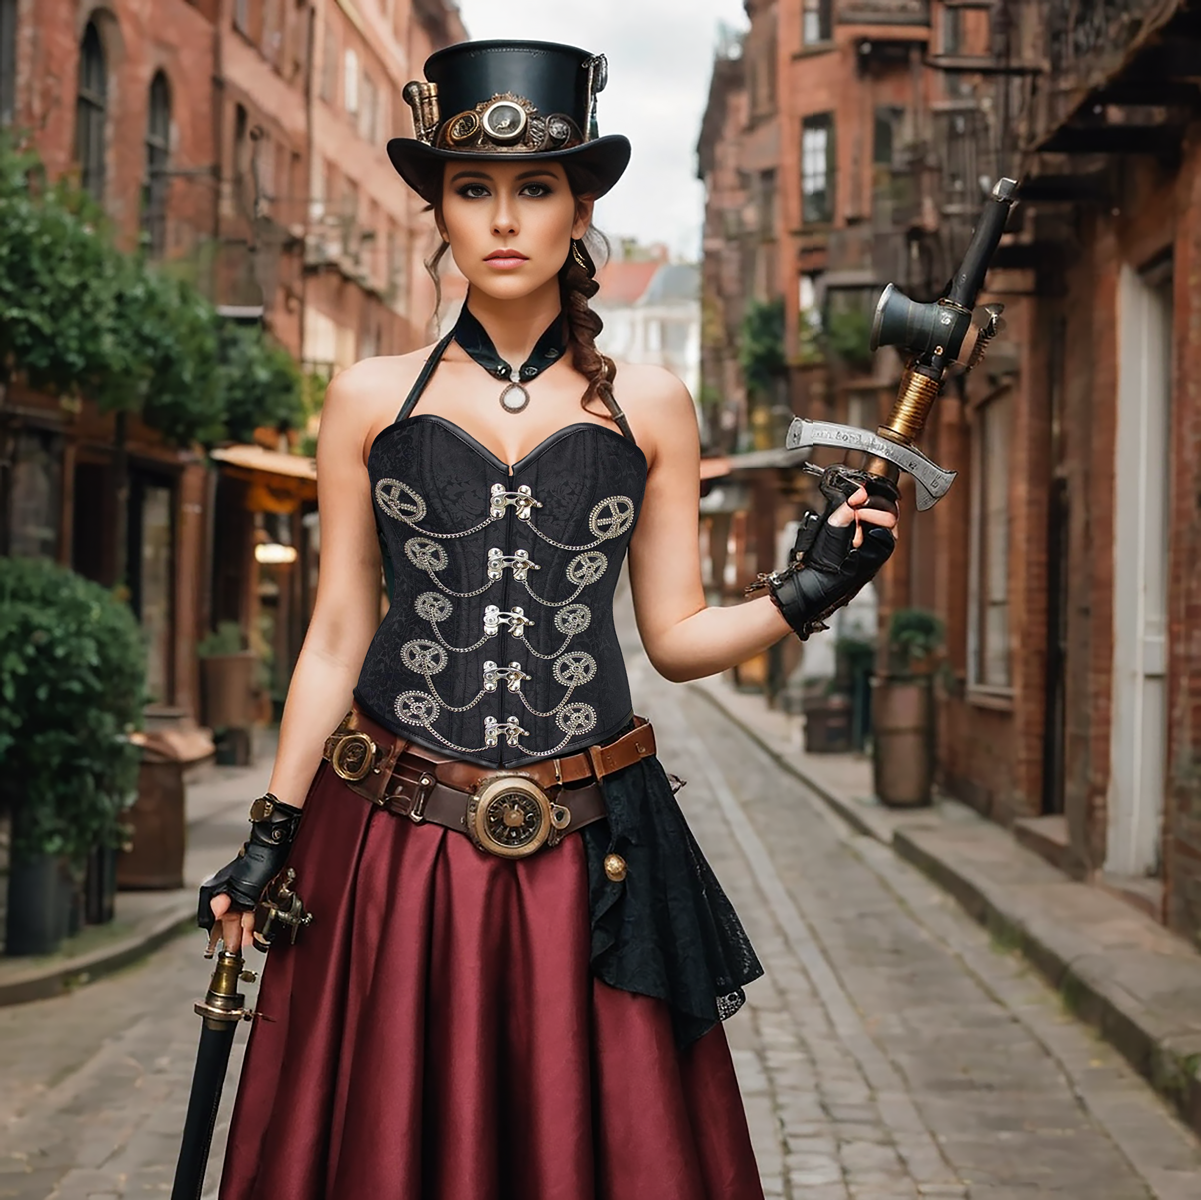 Steampunk or pirate dress: Steampunk under-bust brown and black